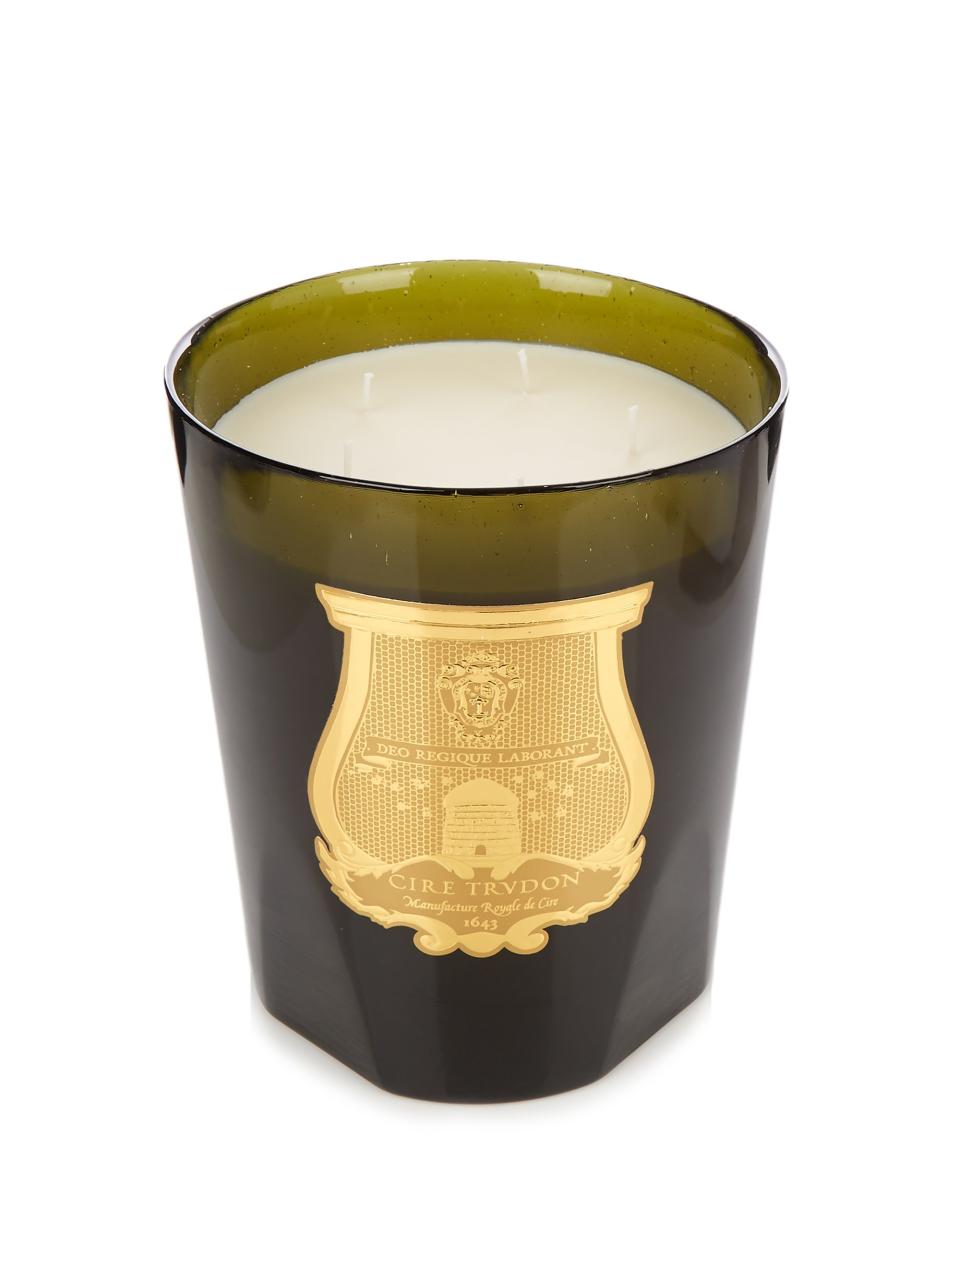 Ciré Trudon large scented candle (£425)